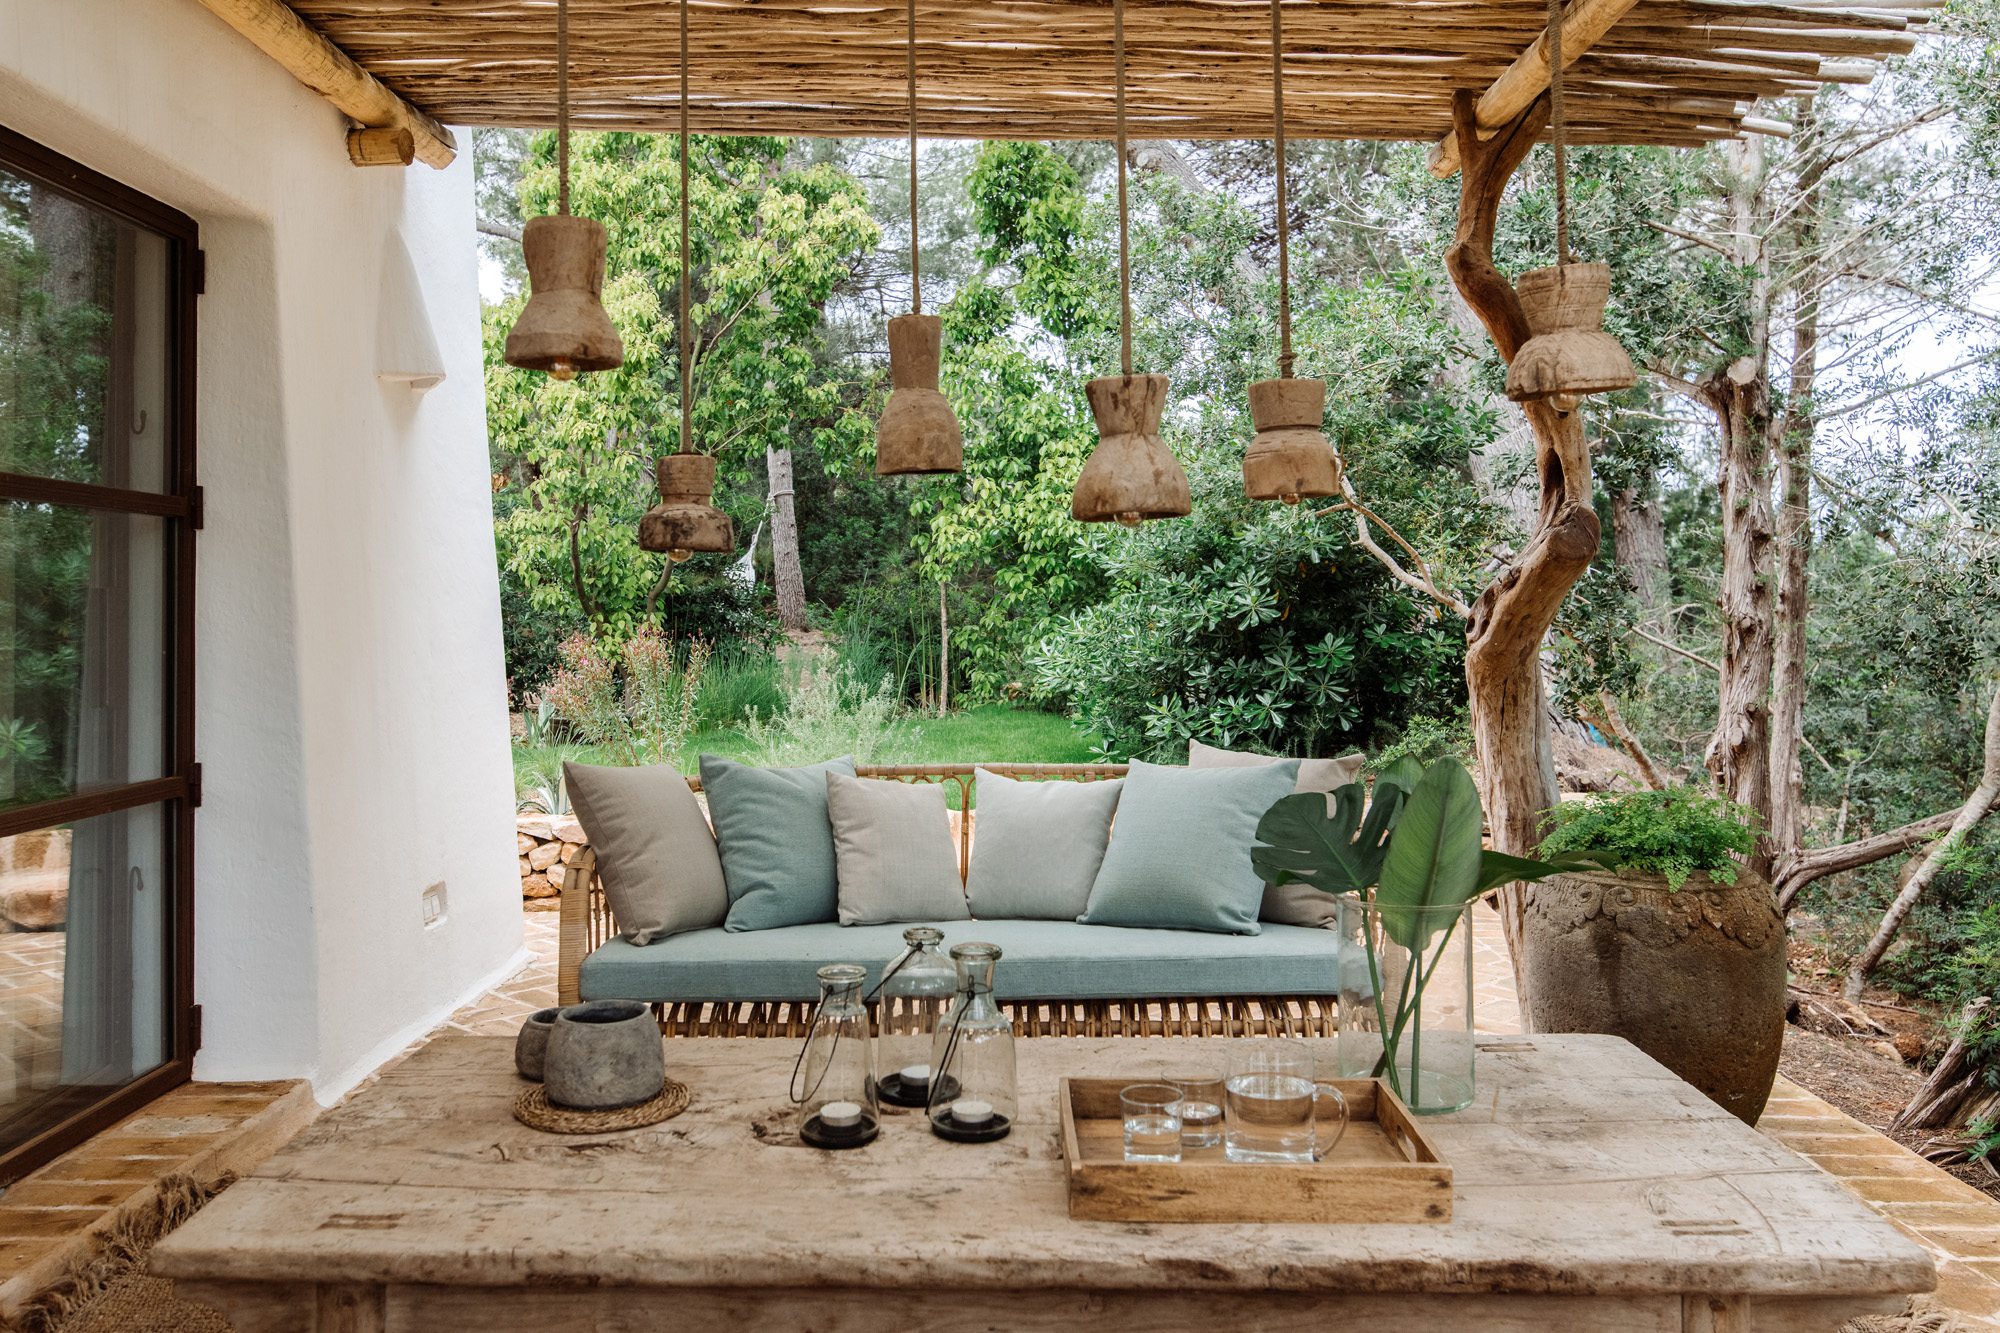 Hanging Lights and Canopy by Jungle Studios